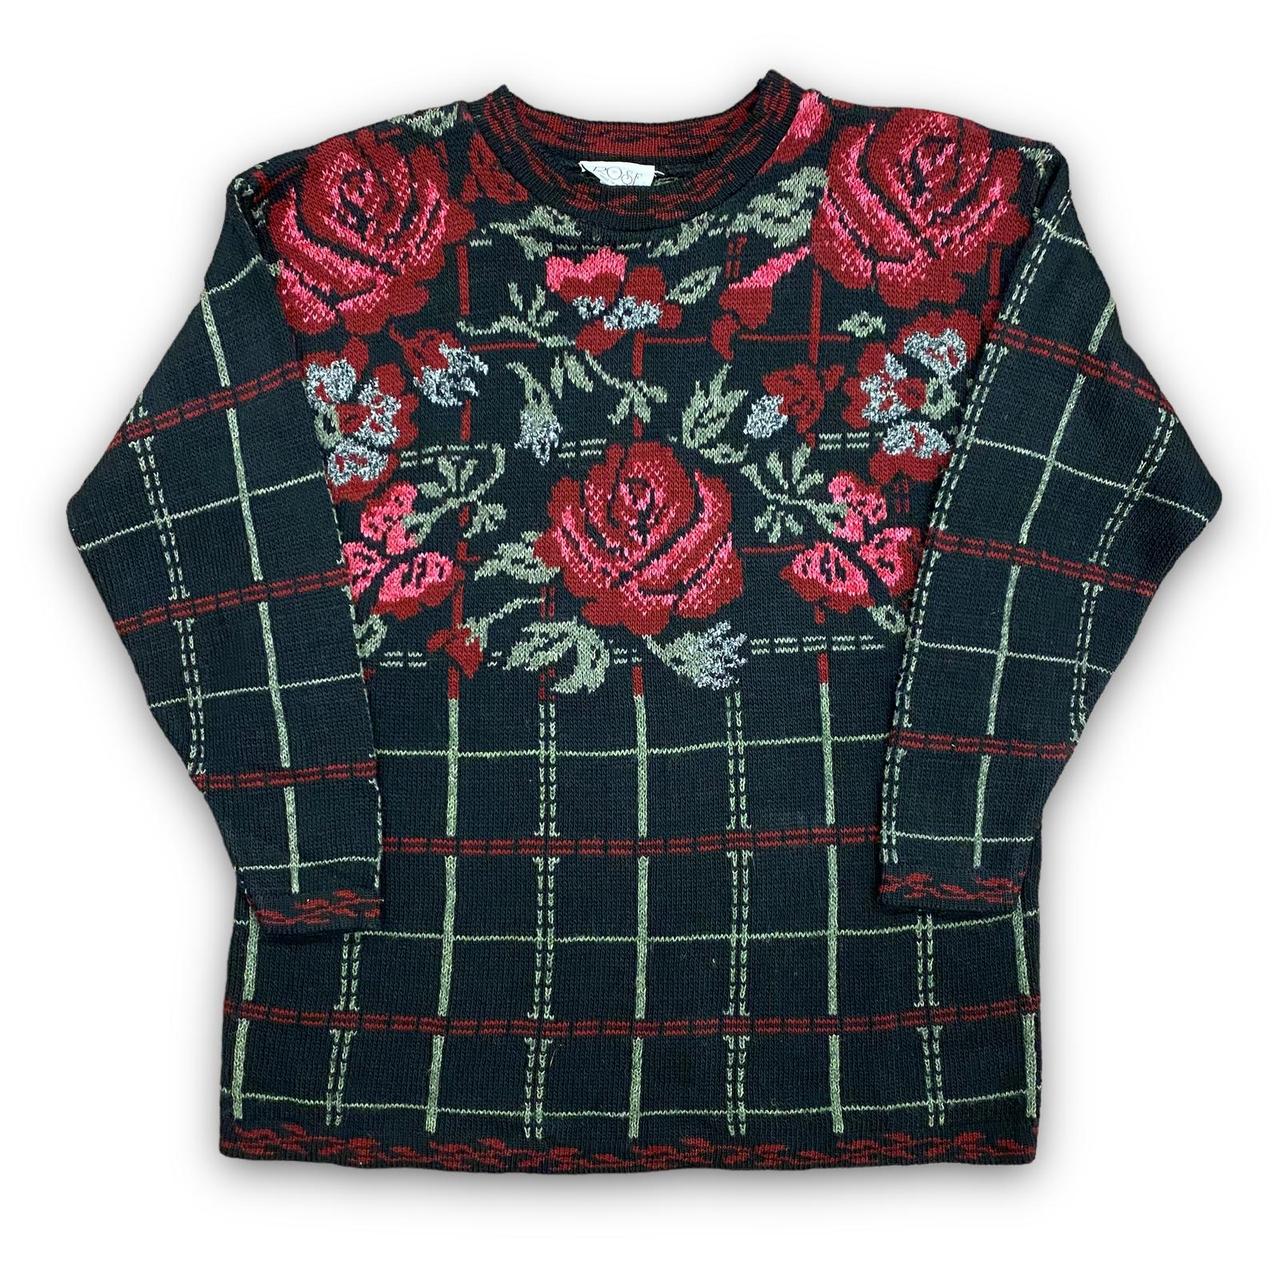 Rose Women's Black and Red Jumper